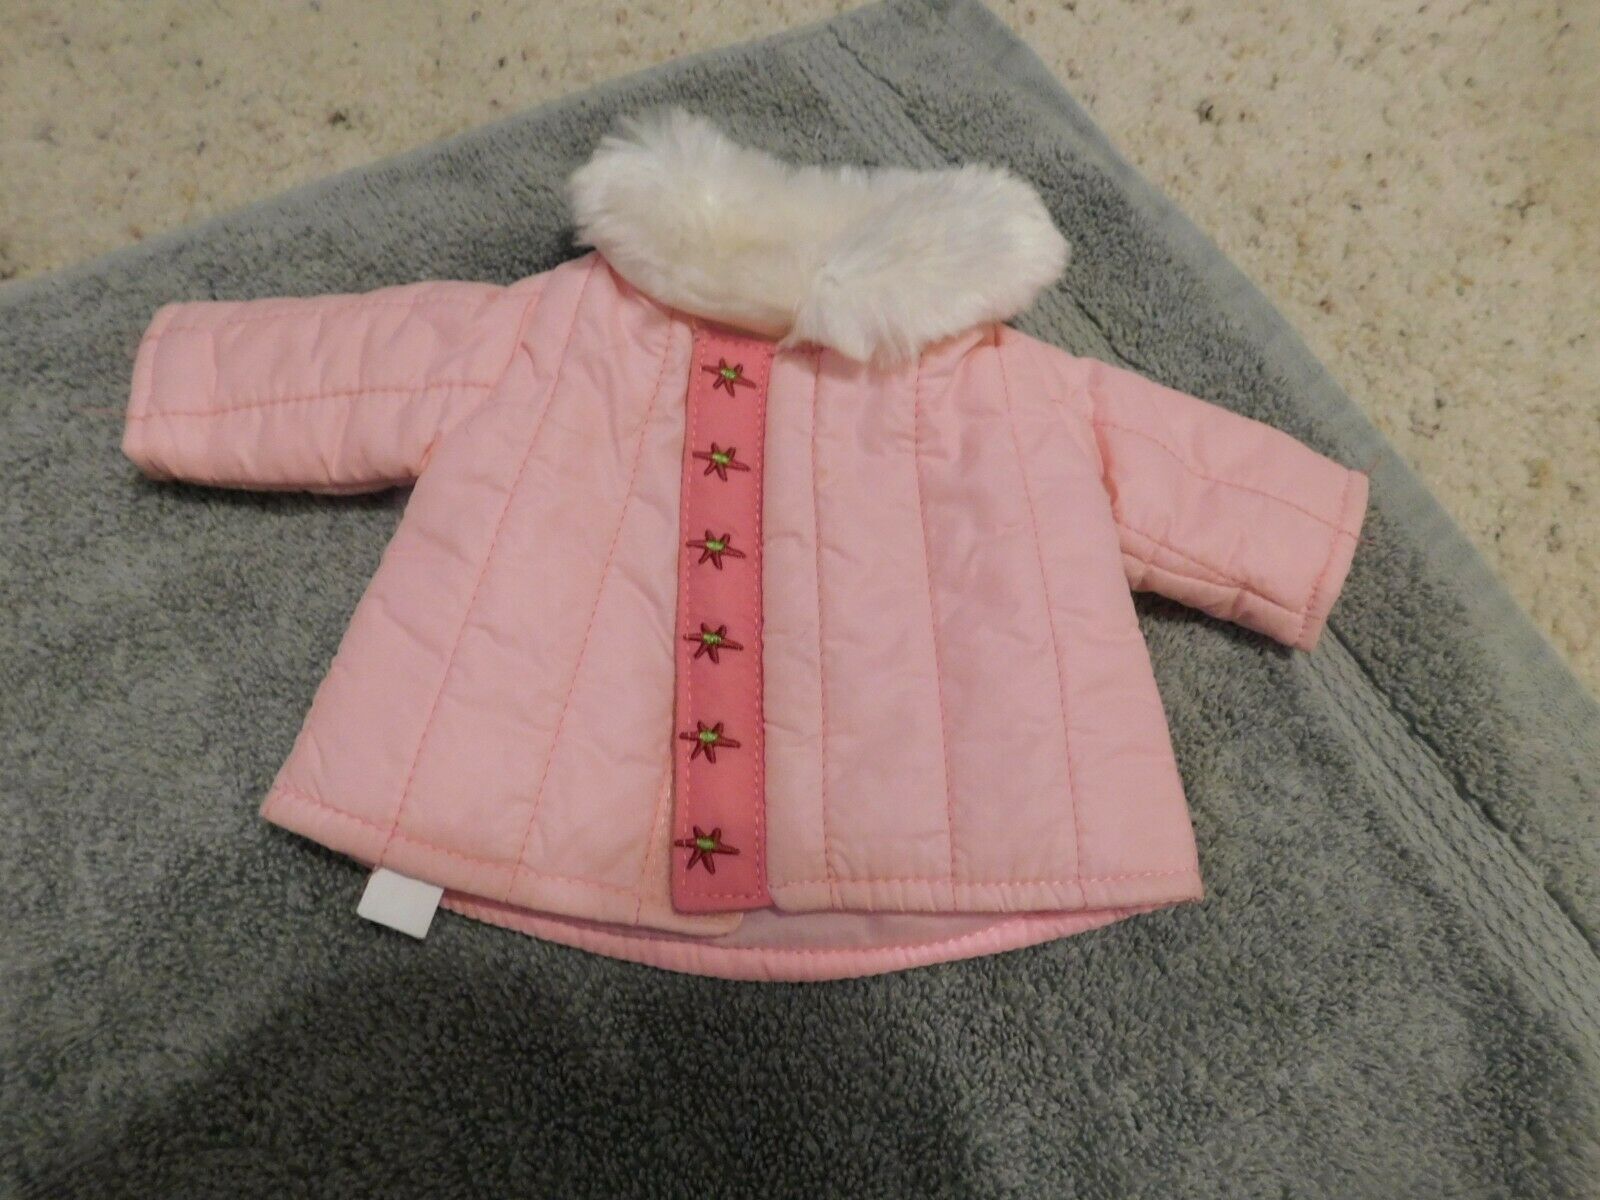 Pottery Barn Kids 18" Doll Jacket - Pink Very Gently Used